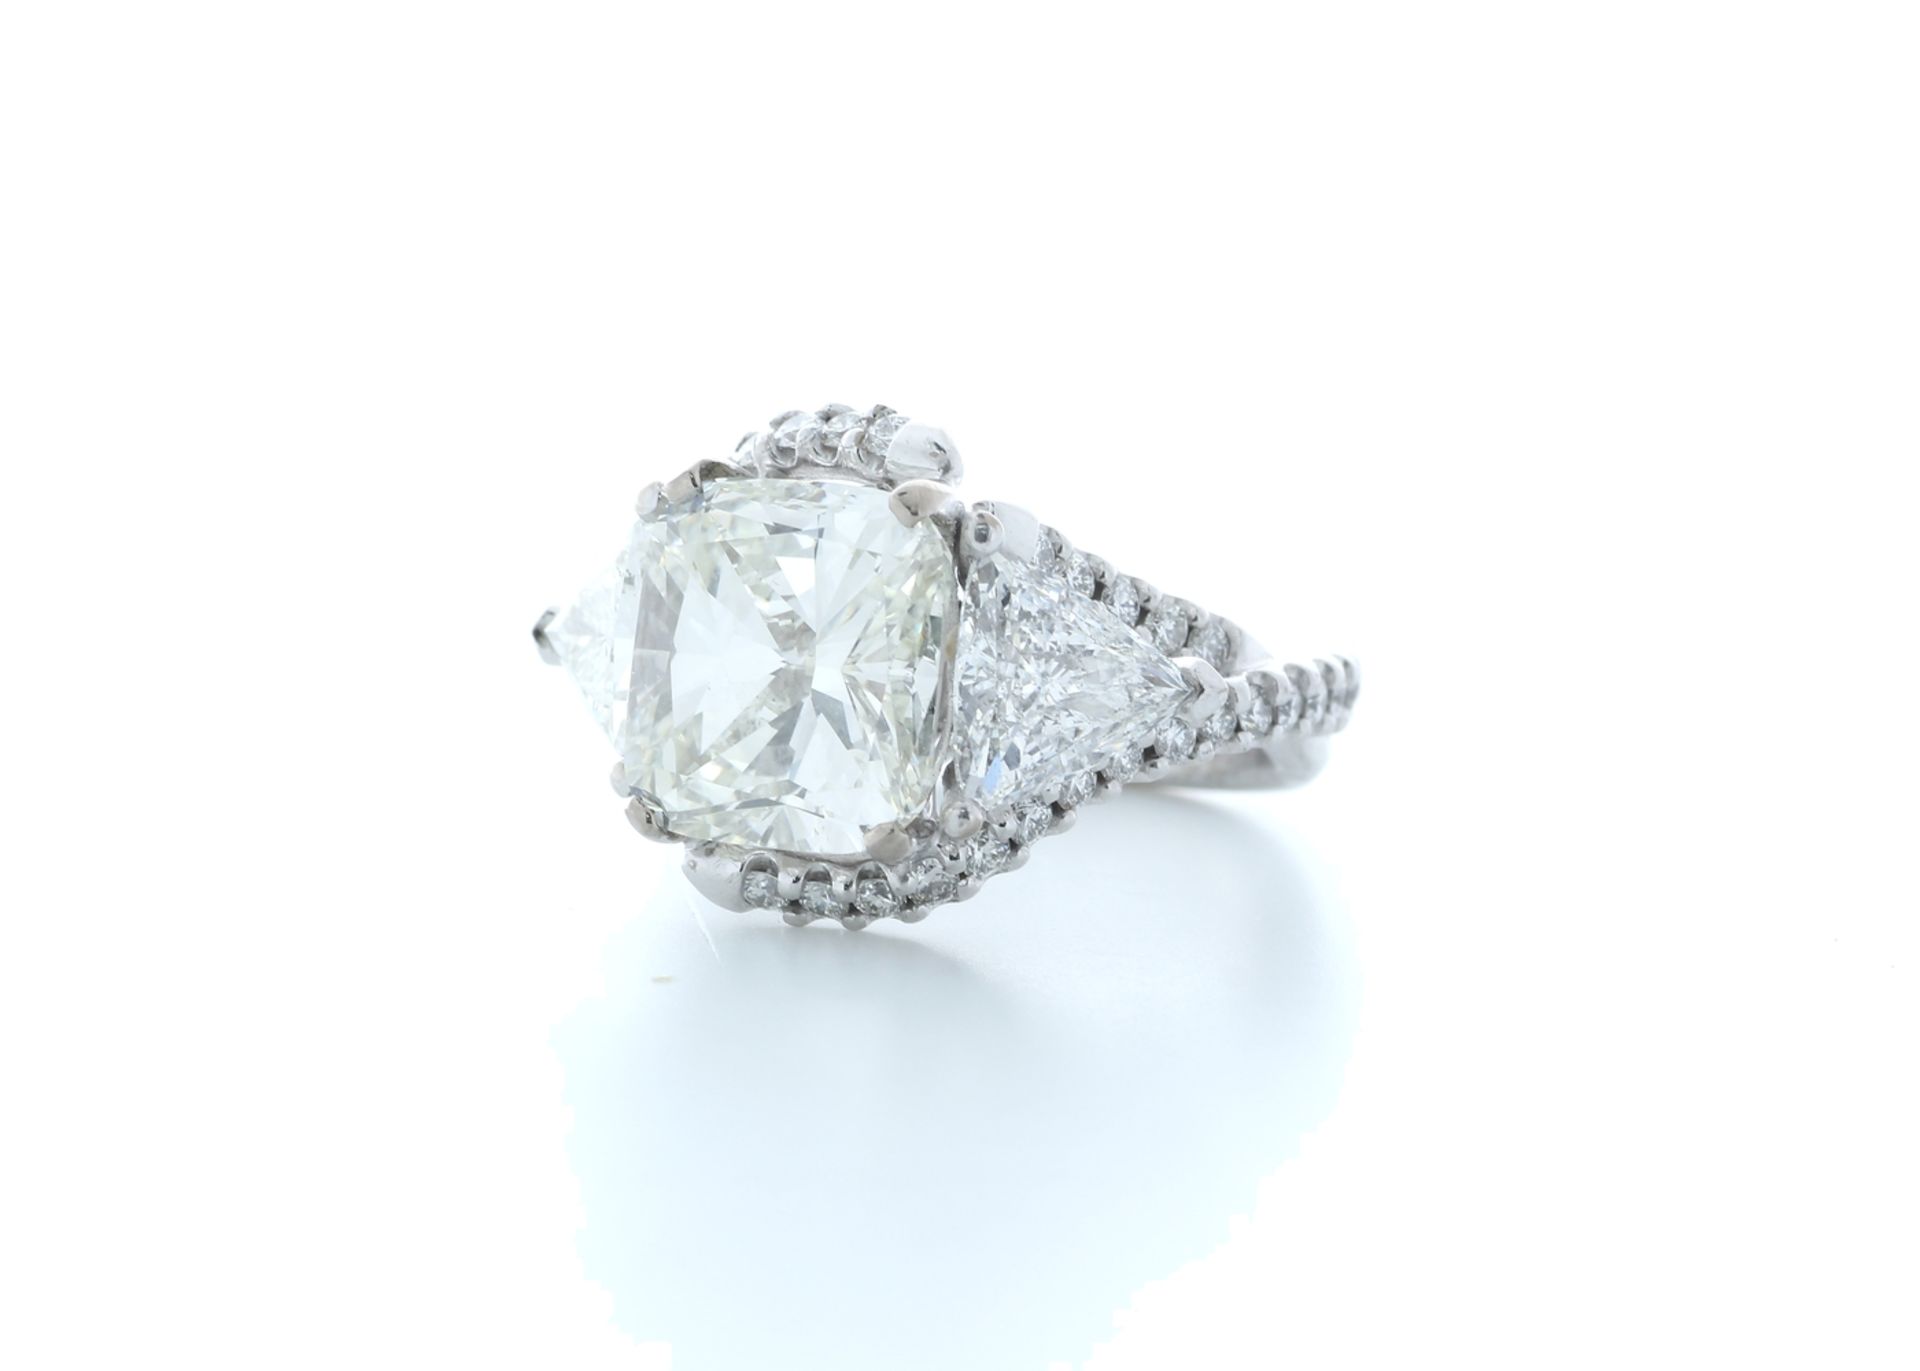 18ct White Gold Cushion Diamond Ring 7.03 (4.51) Carats - Valued by IDI £265,500.00 - 18ct White - Image 2 of 5